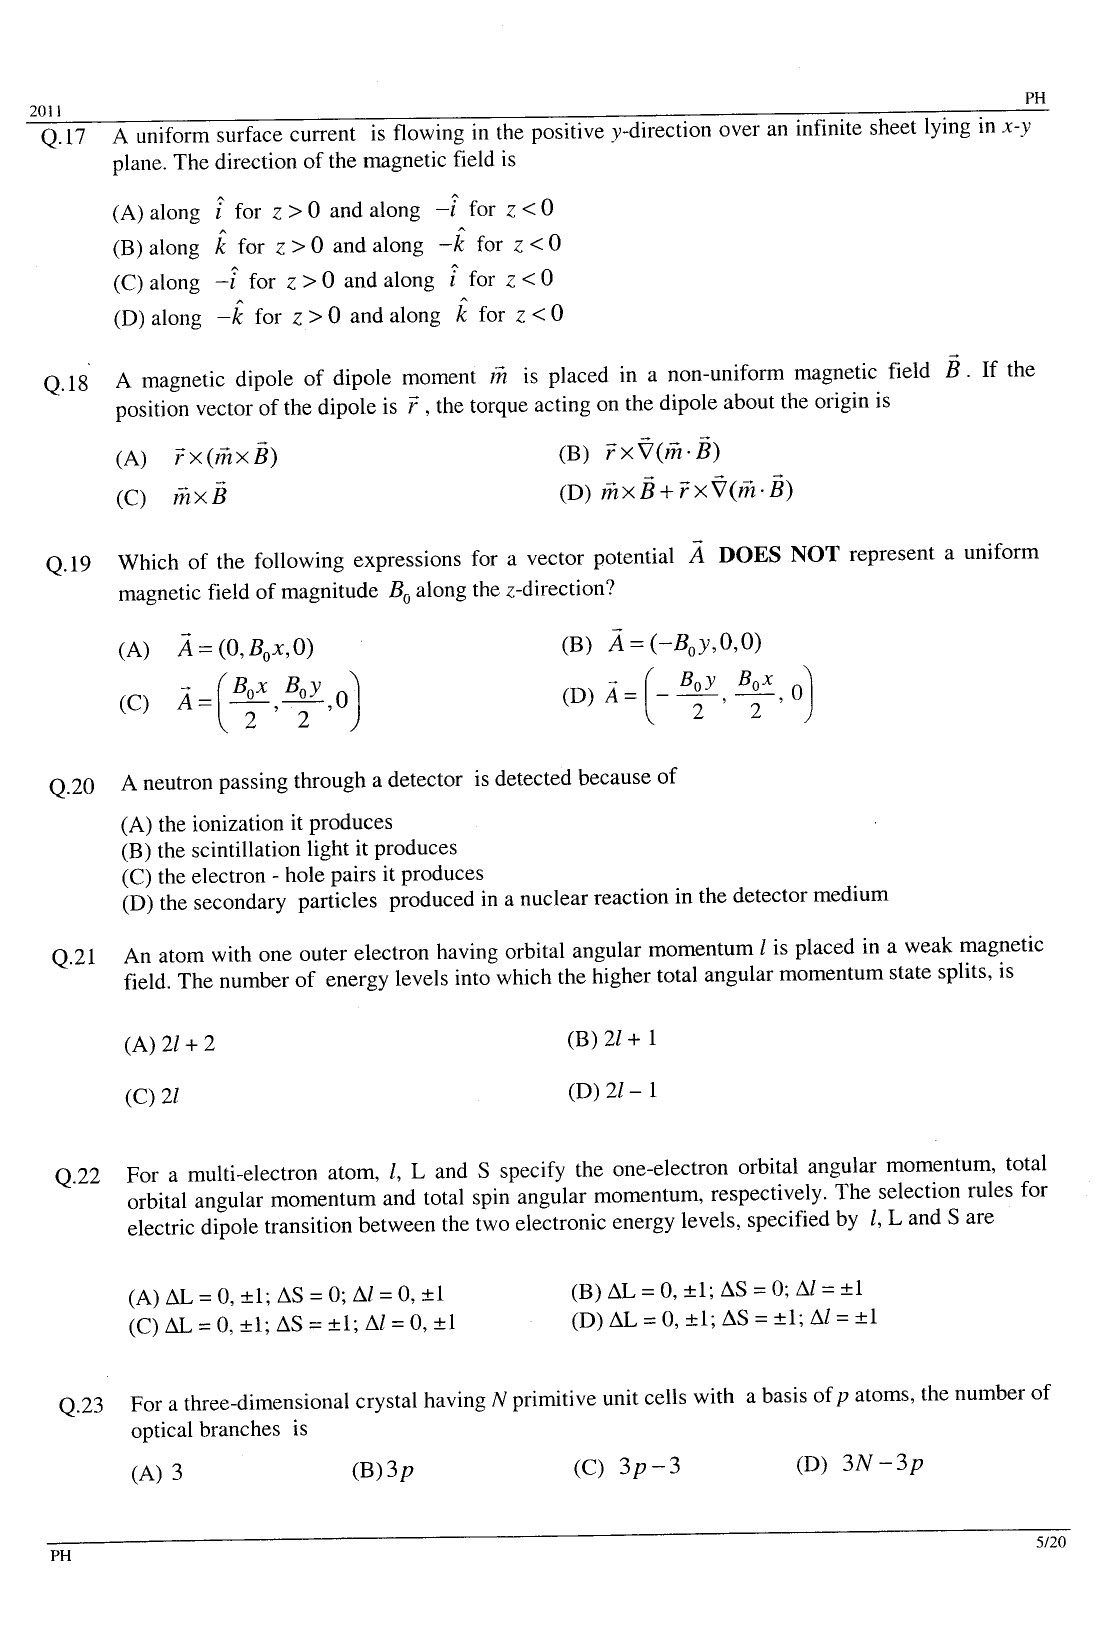 GATE Exam Question Paper 2011 Physics 5